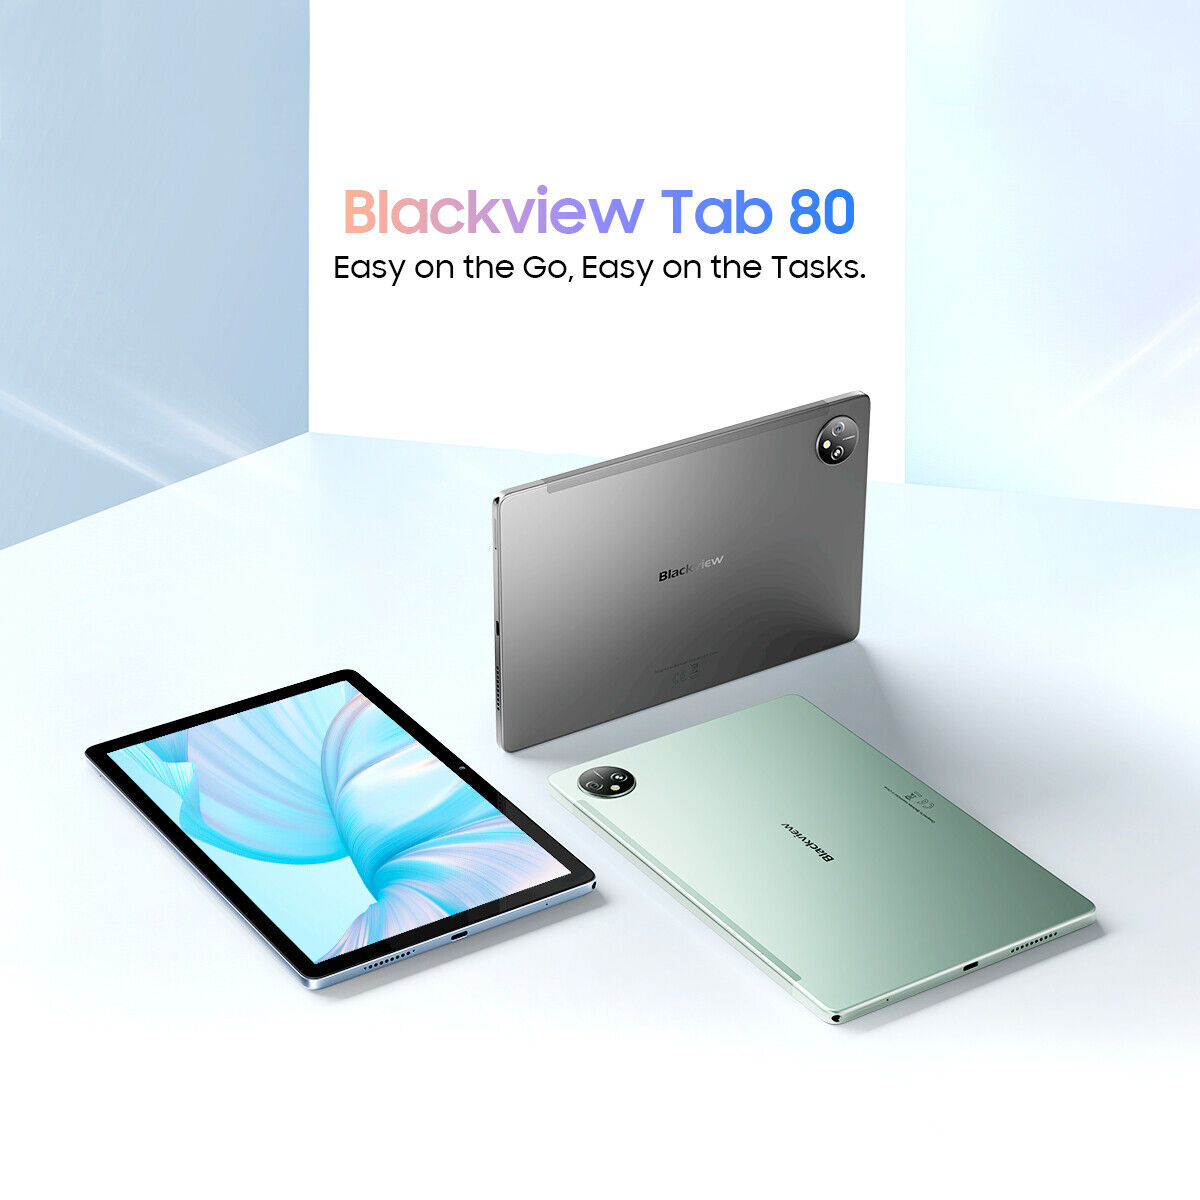 Blackview Tab 80 4+64/128GB 8+128GB Unisoc T606 7680mAh Widevine L1 Support  Android Tablet PC